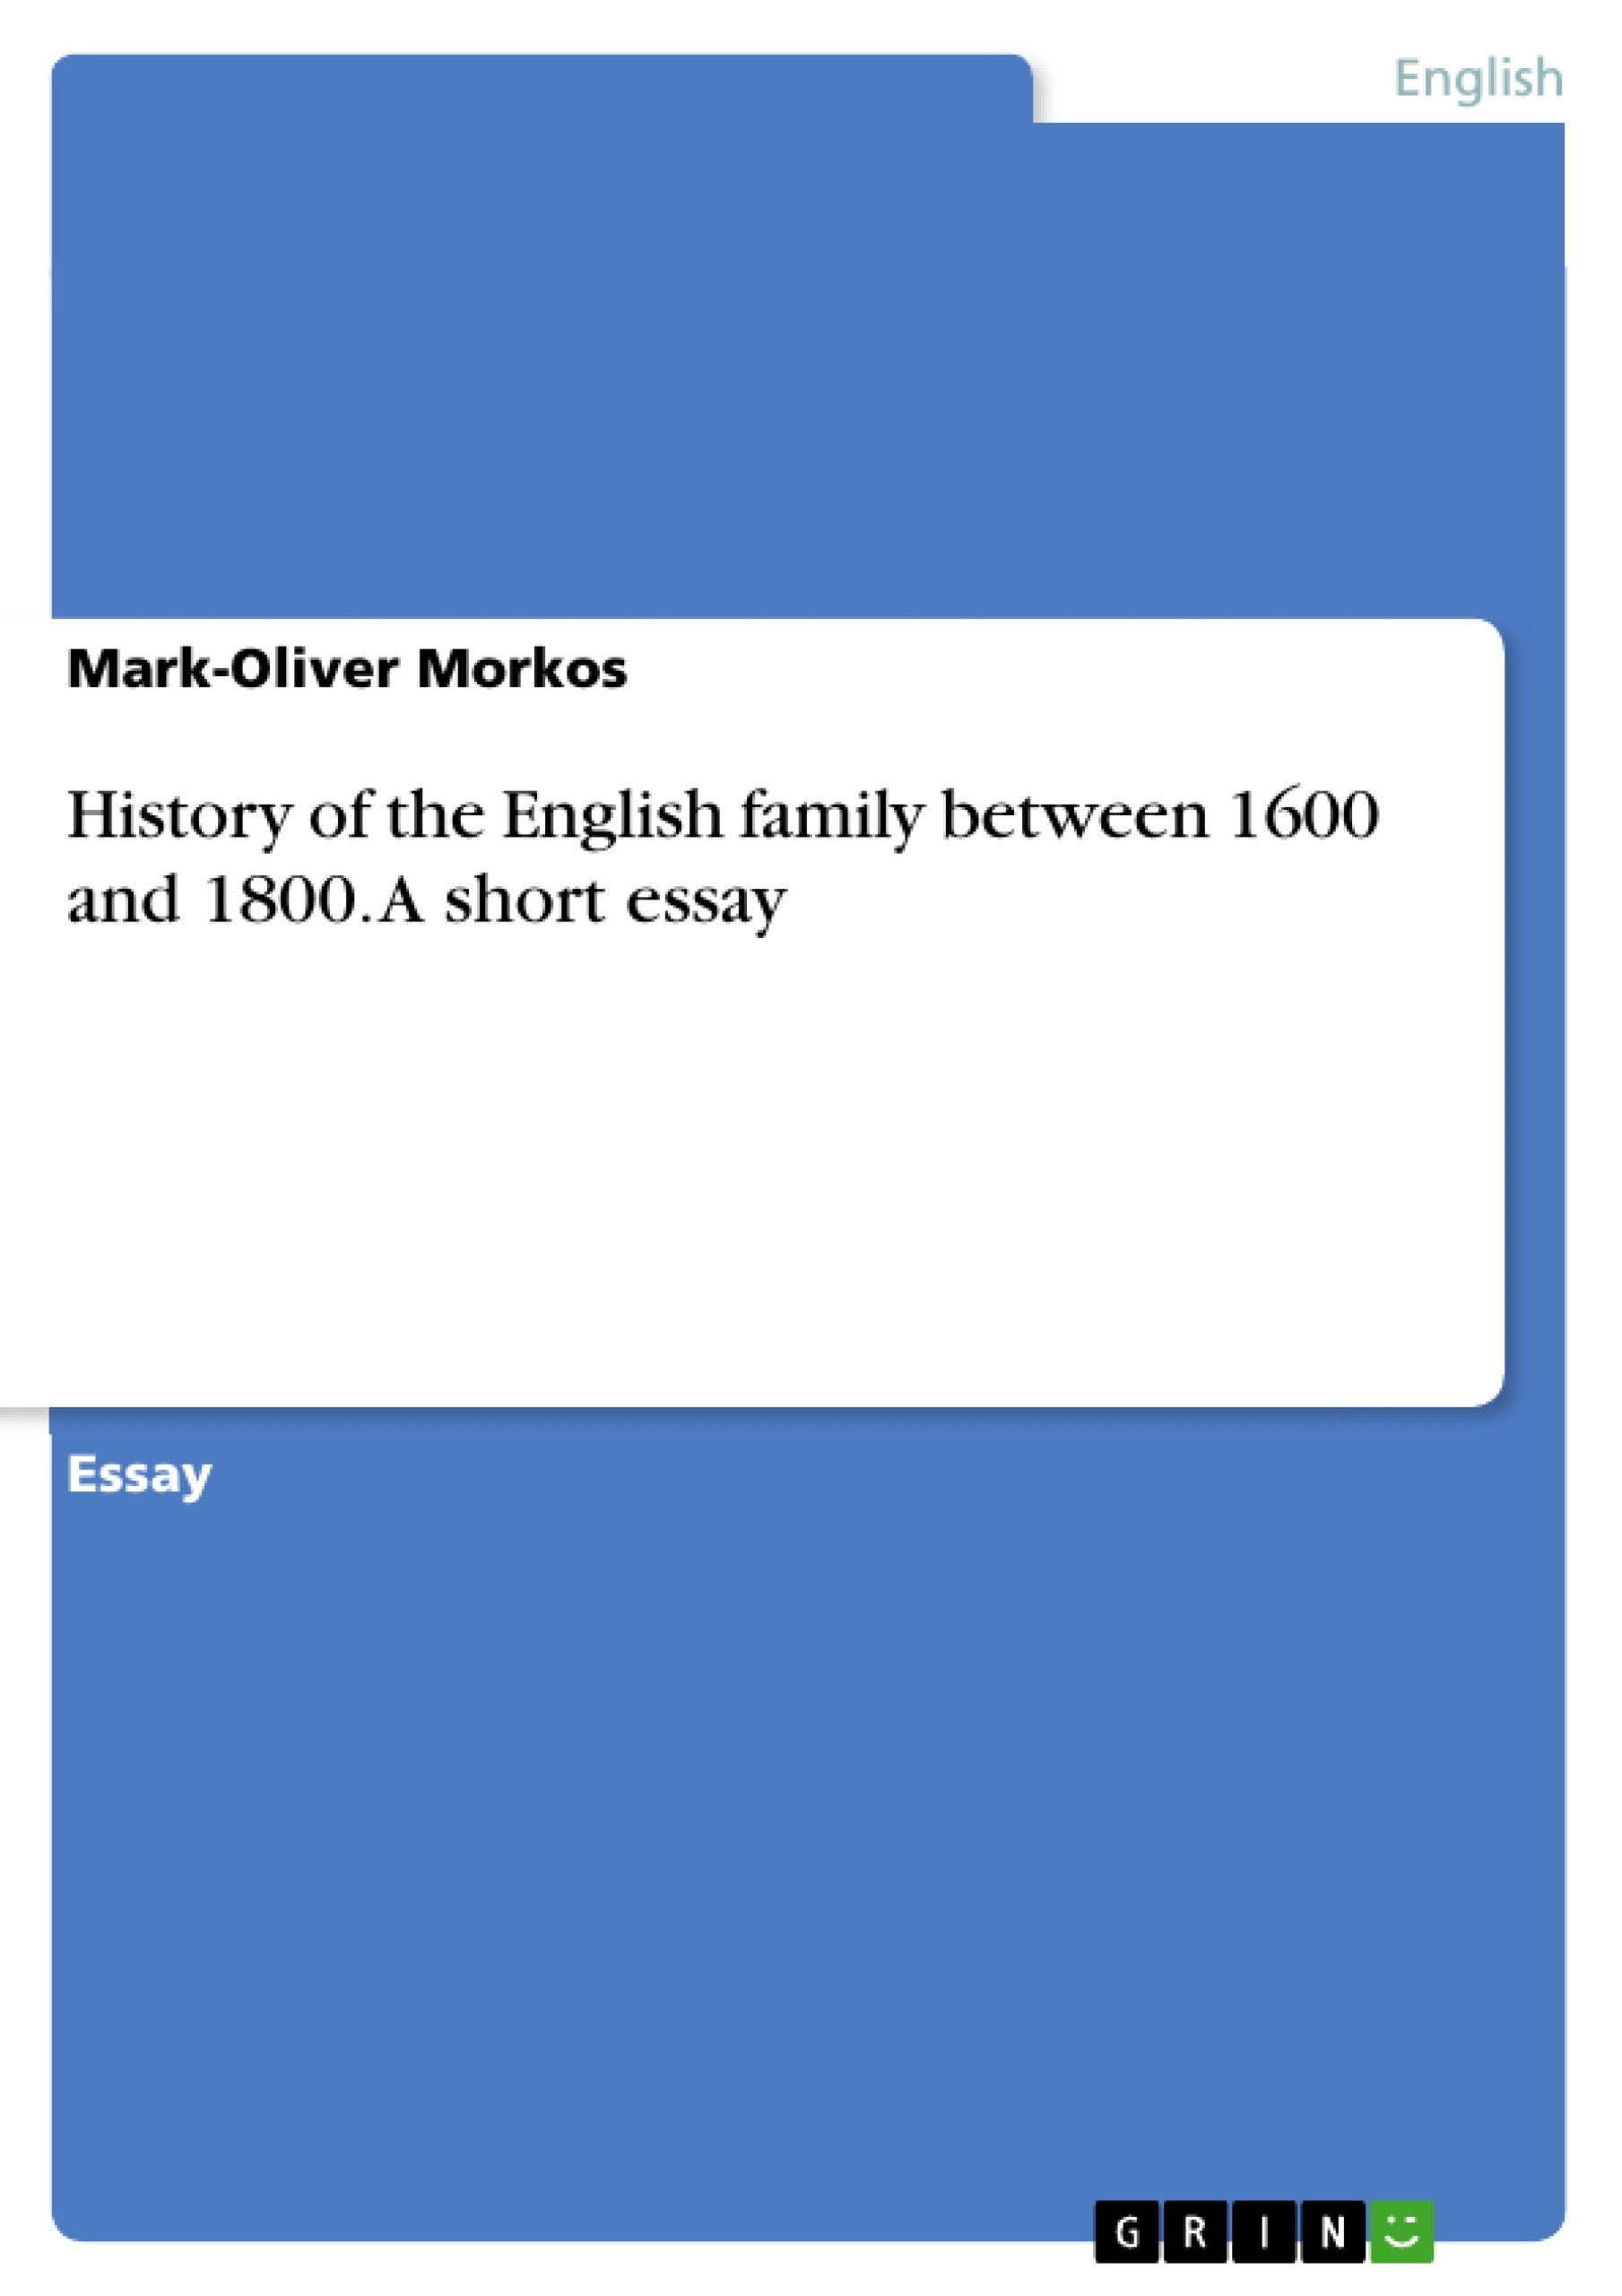 Title: History of the English family between 1600 and 1800. A short essay